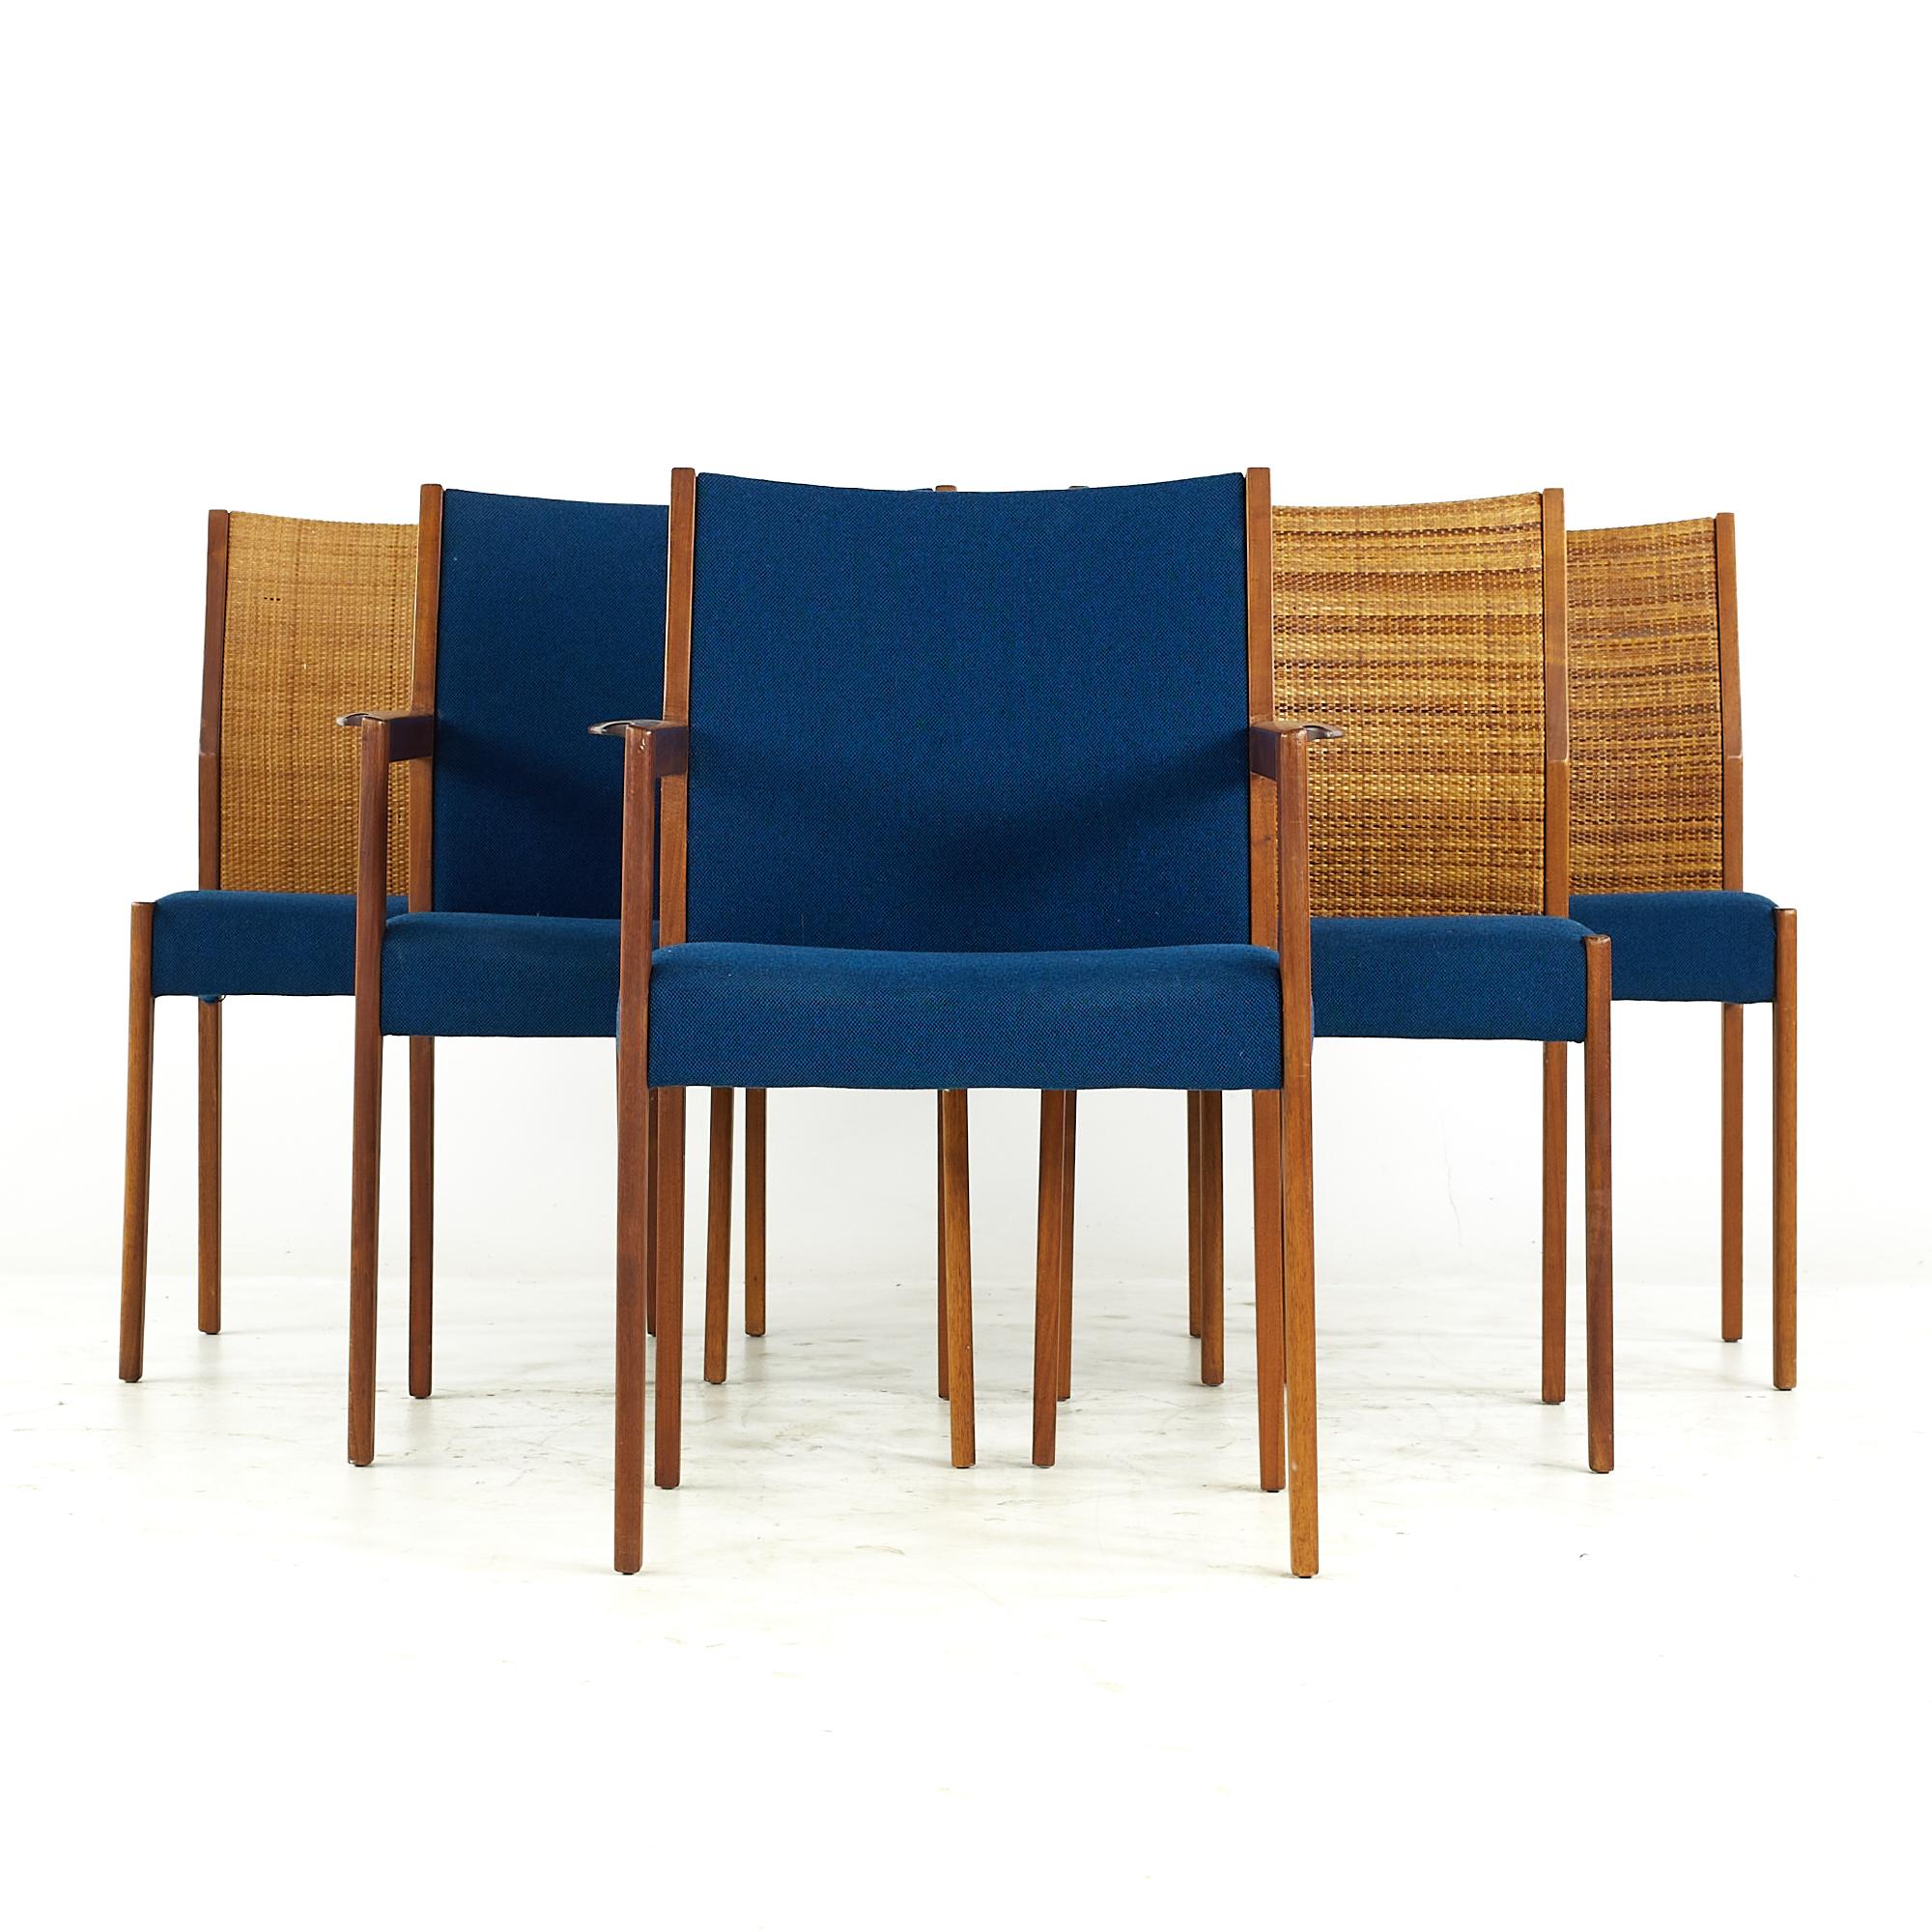 Jens Risom midcentury Cane and Walnut Dining Chairs - Set of 6

Each armless chair measures: 19.5 wide x 18.25 deep x 34.5 high, with a seat height of 18.5 inches
Each captains chair measures: 24 wide x 18.25 deep x 34.5 high, with a seat height